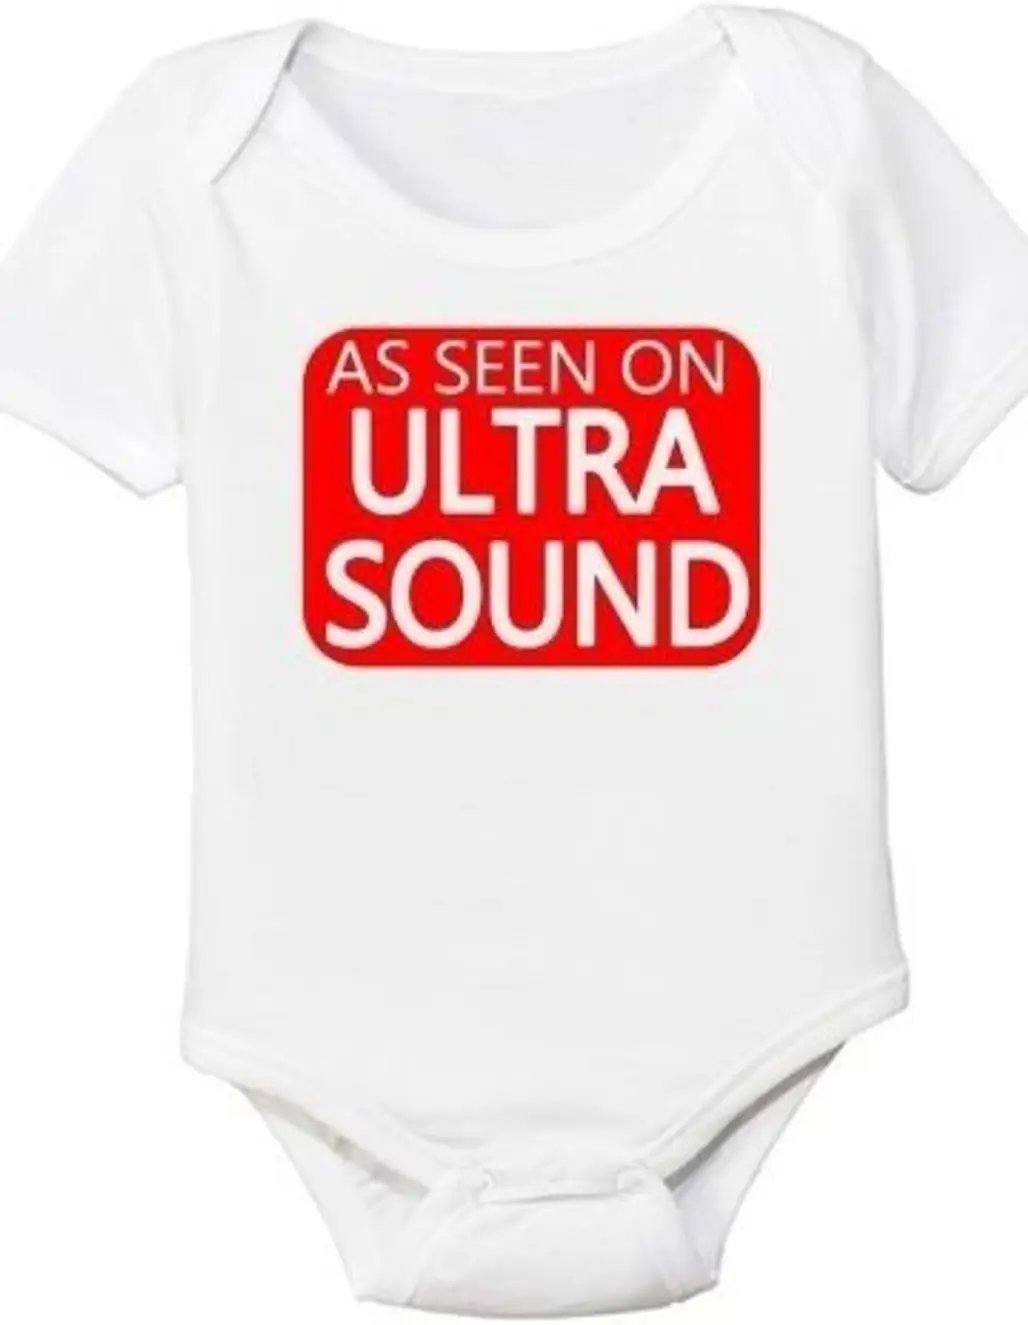 infant bodysuit,clothing,baby & toddler clothing,baby products,product,